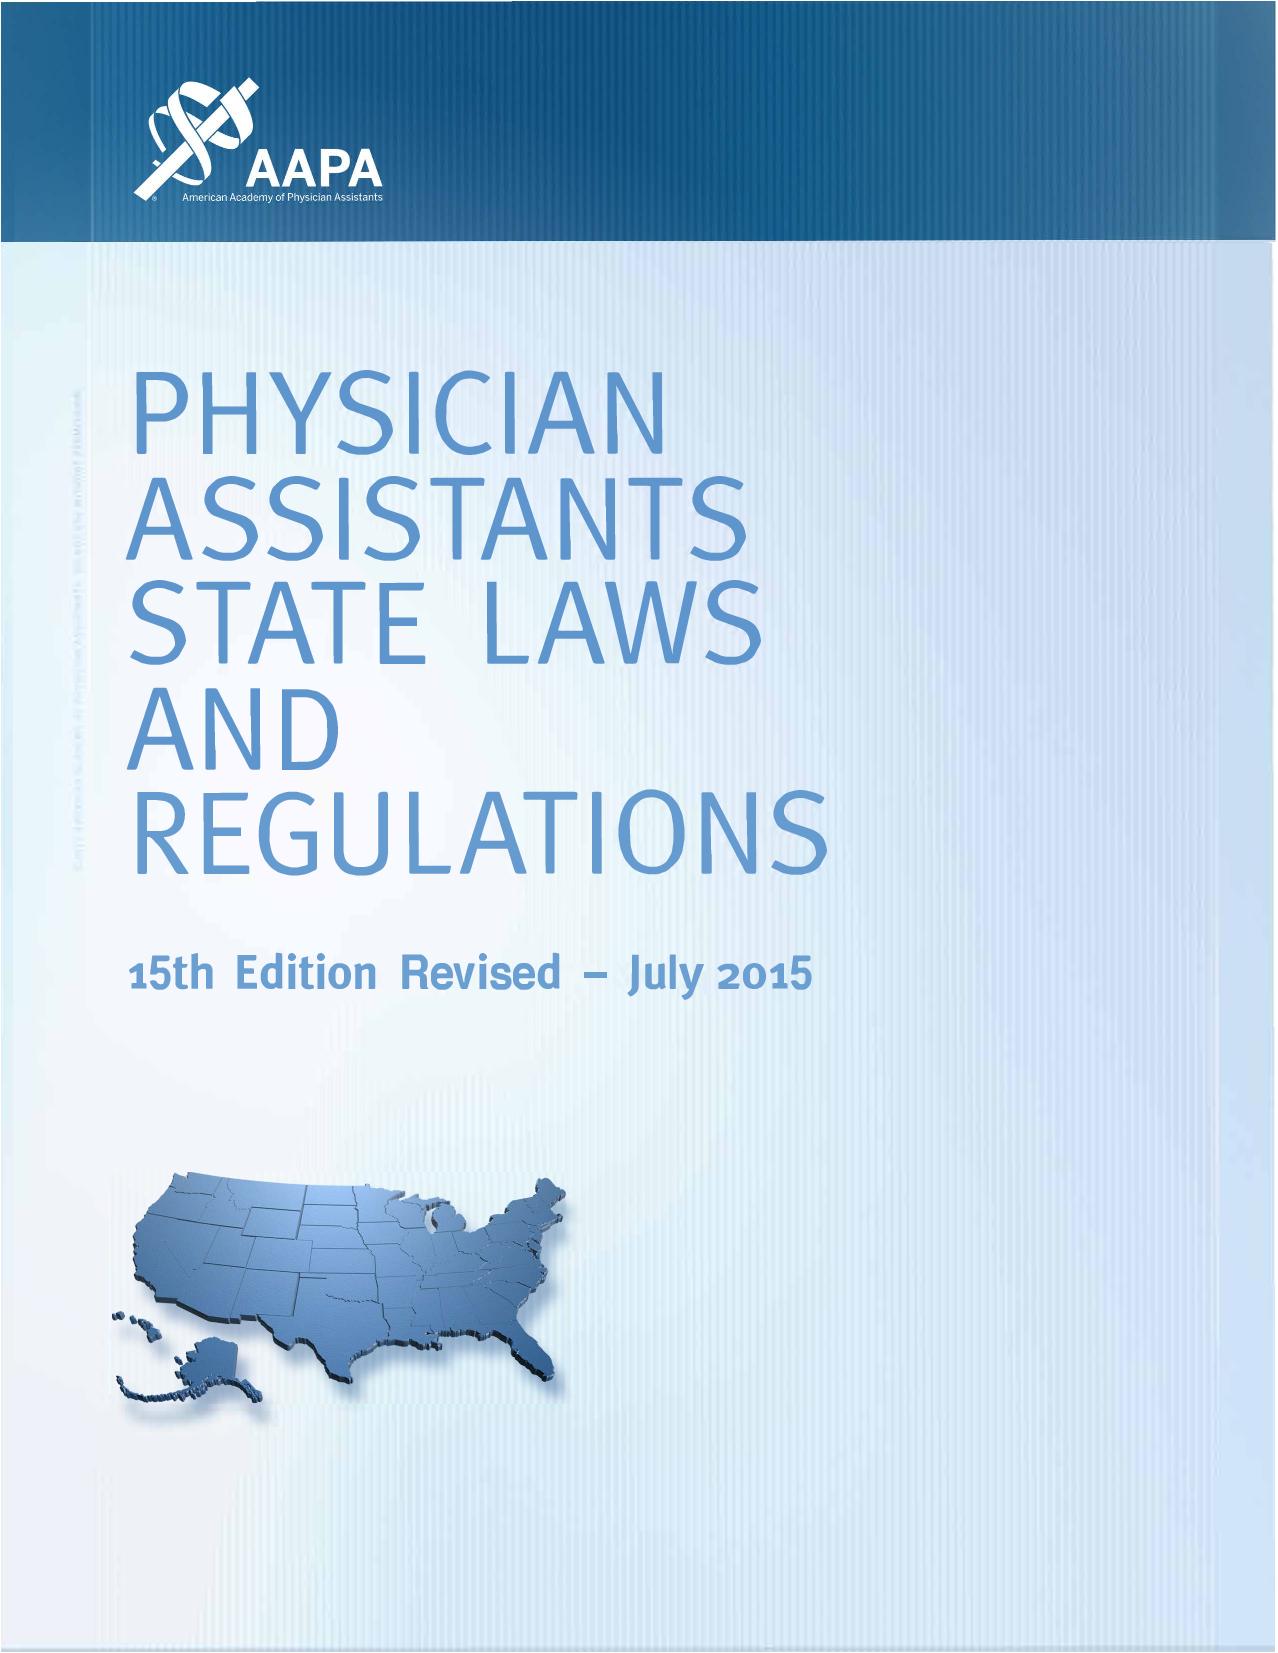 Physician Assistants State Laws and Regulations 15th Edition Revised